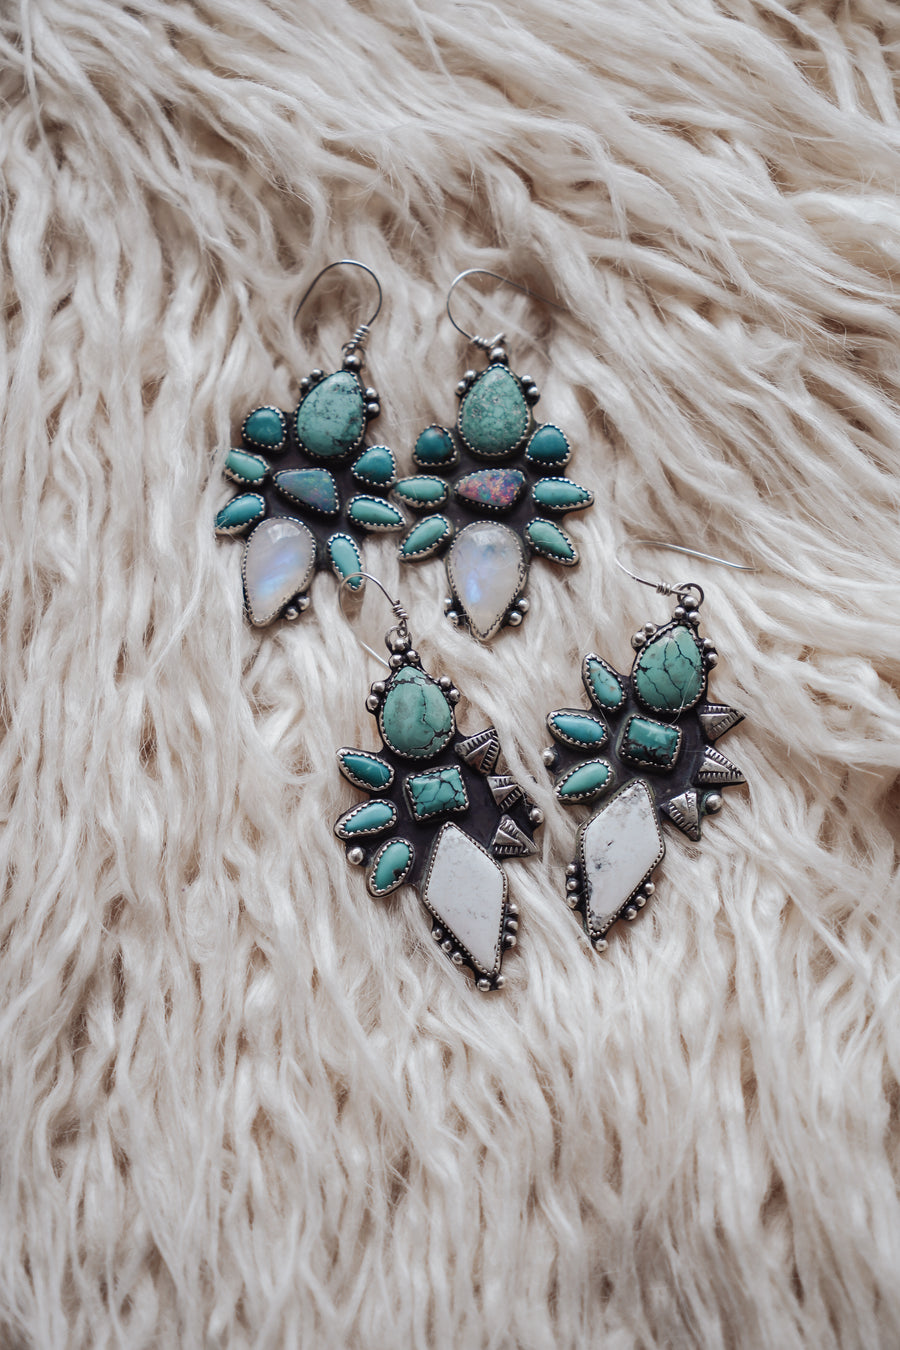 Statement Earrings in White Buffalo, Campitos, Hubei, and Variscite Turquoise